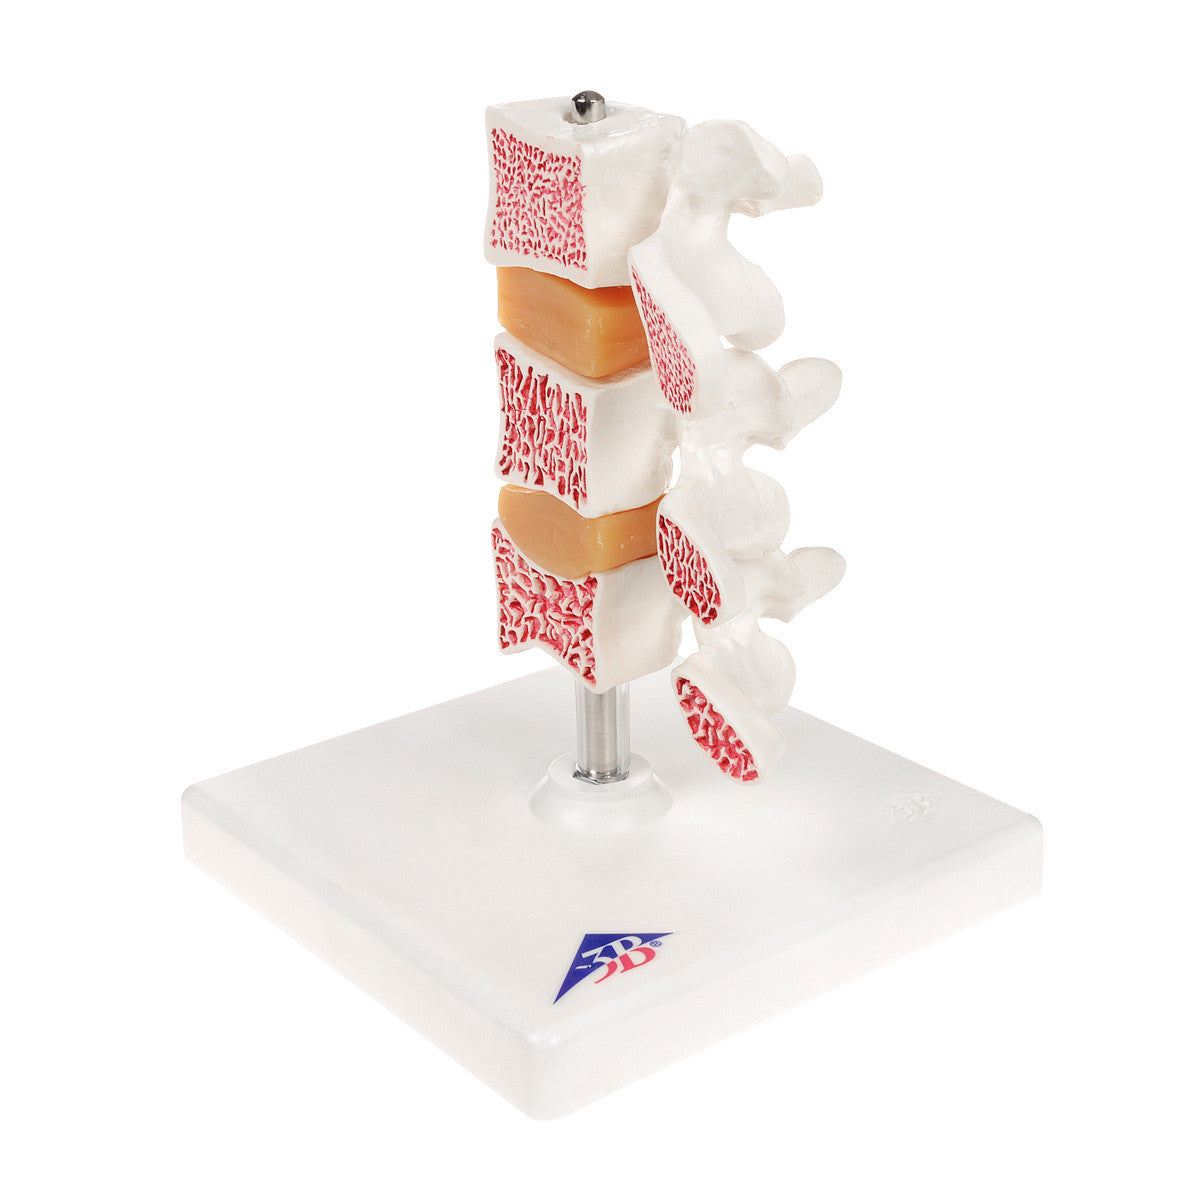 Deluxe Osteoporosis Model - posterior